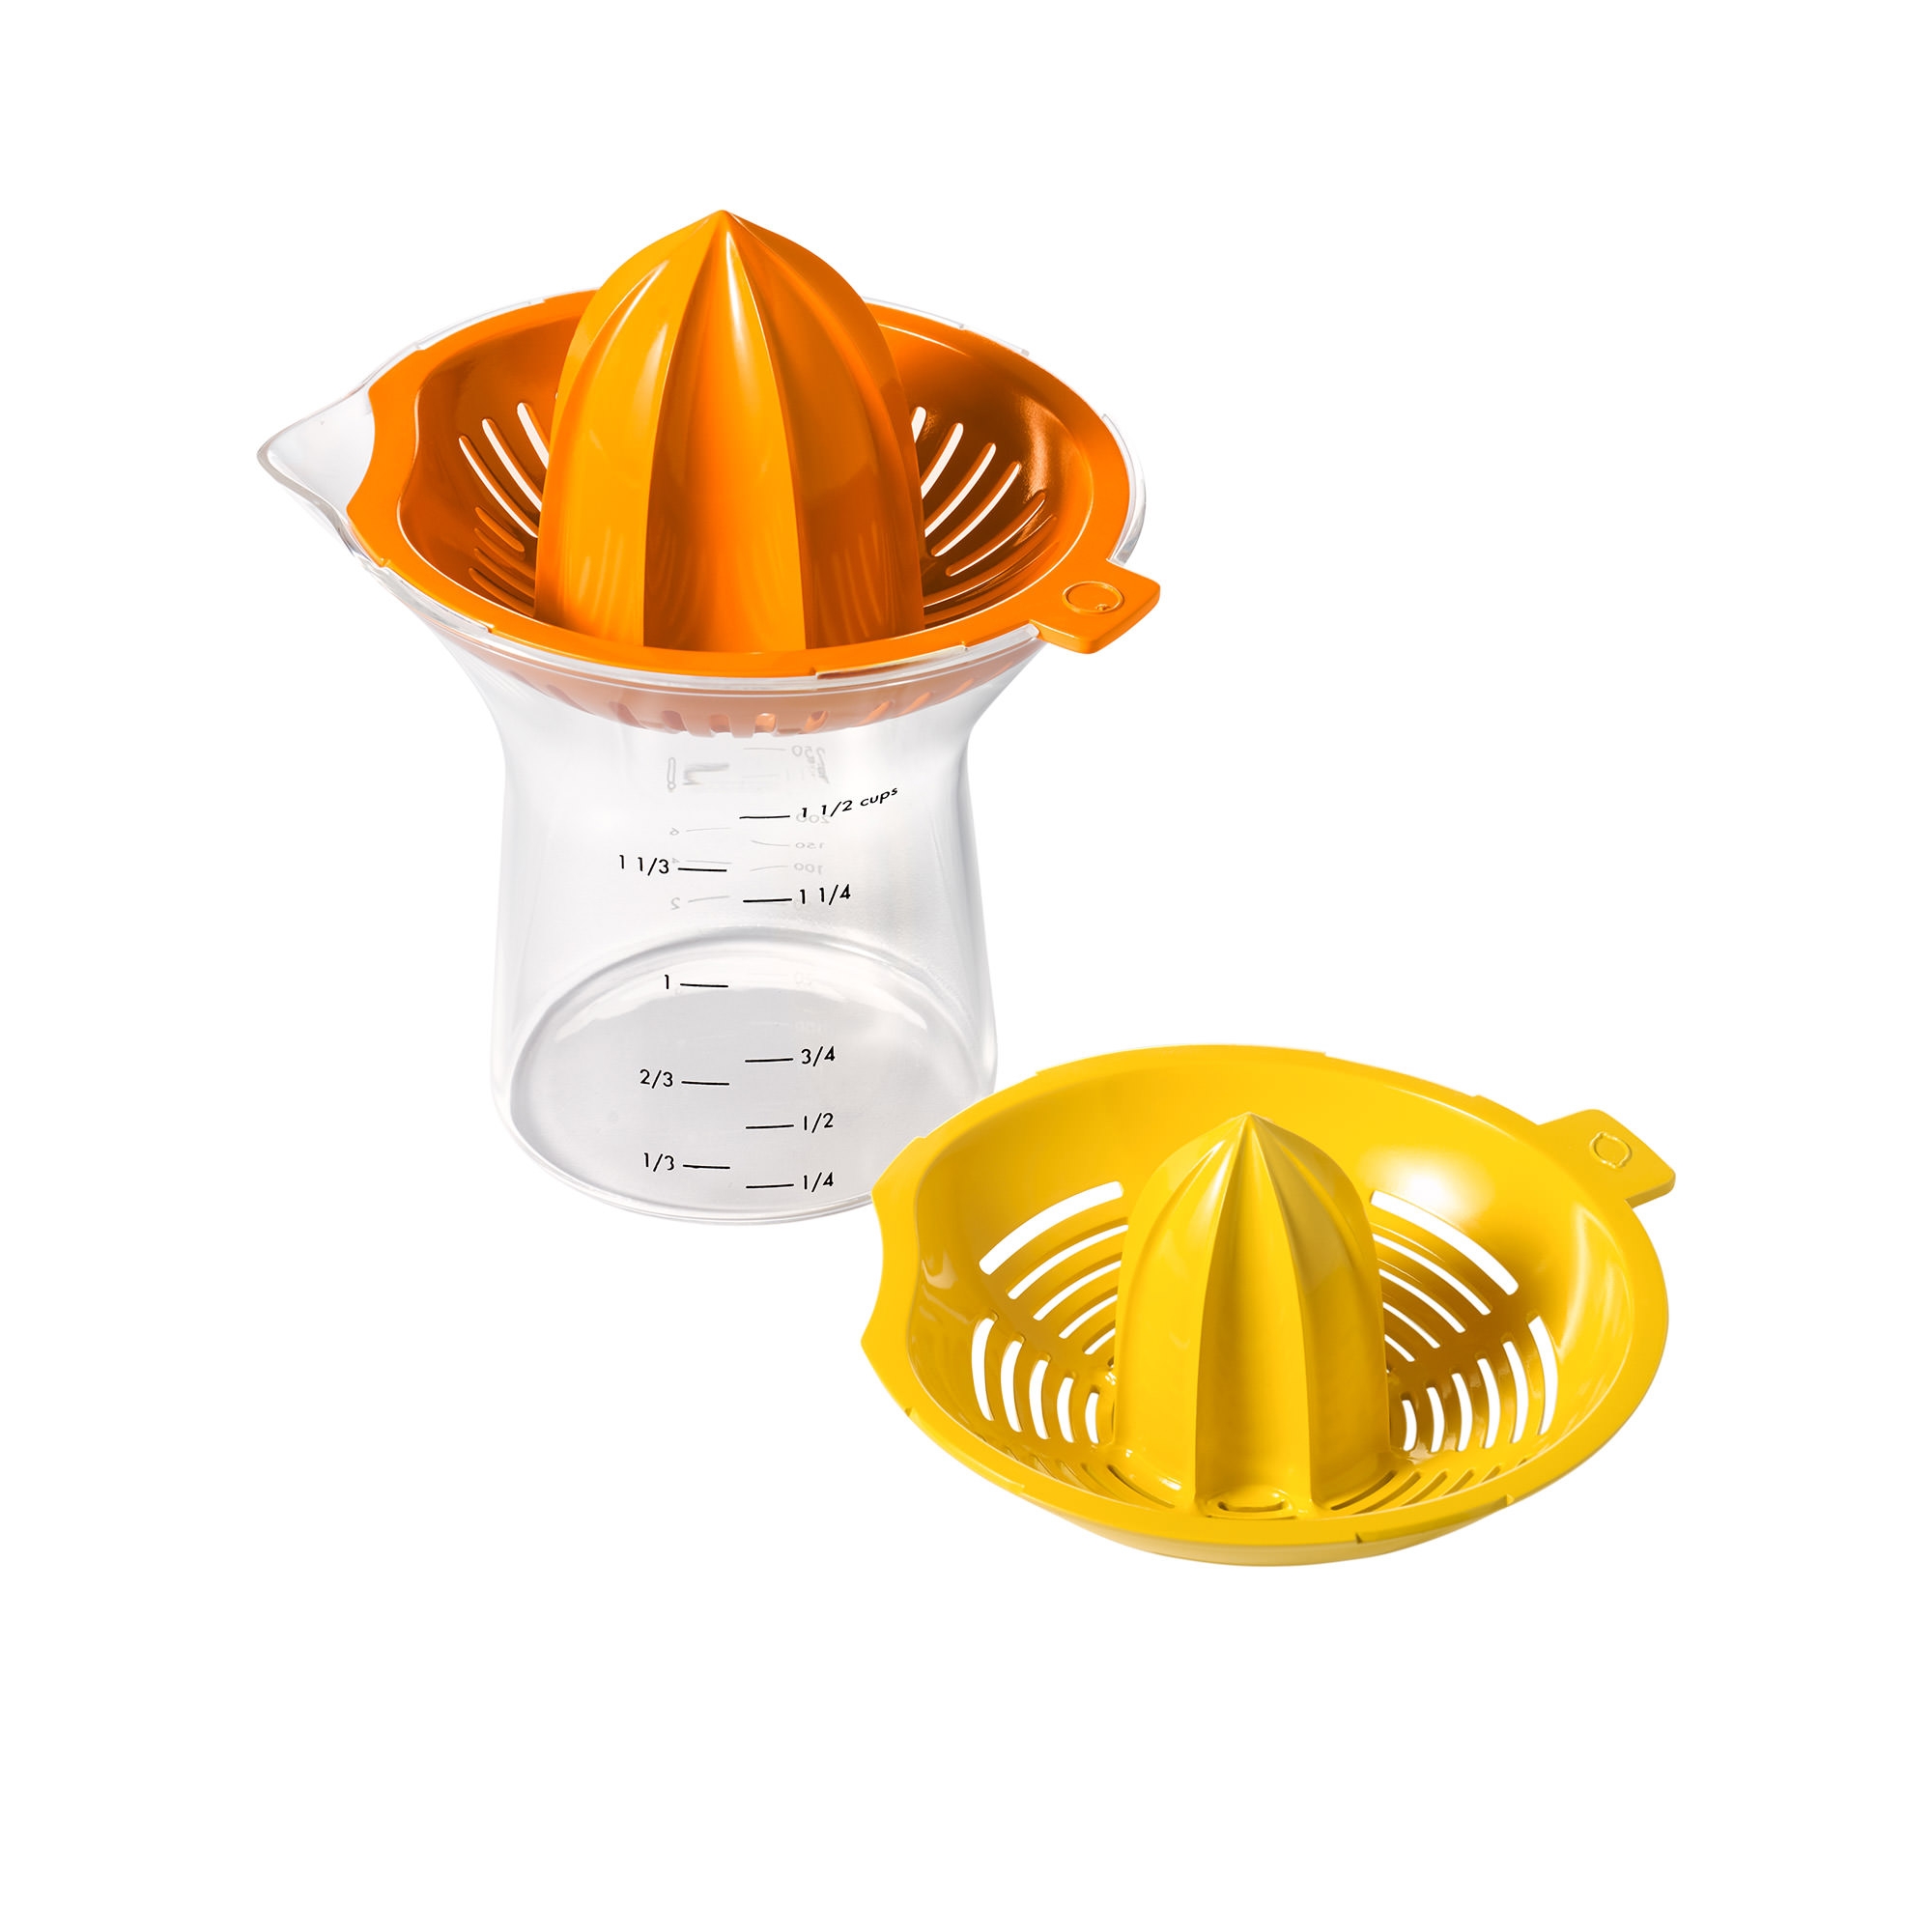 OXO Good Grips 2 in 1 Citrus Juicer Image 1